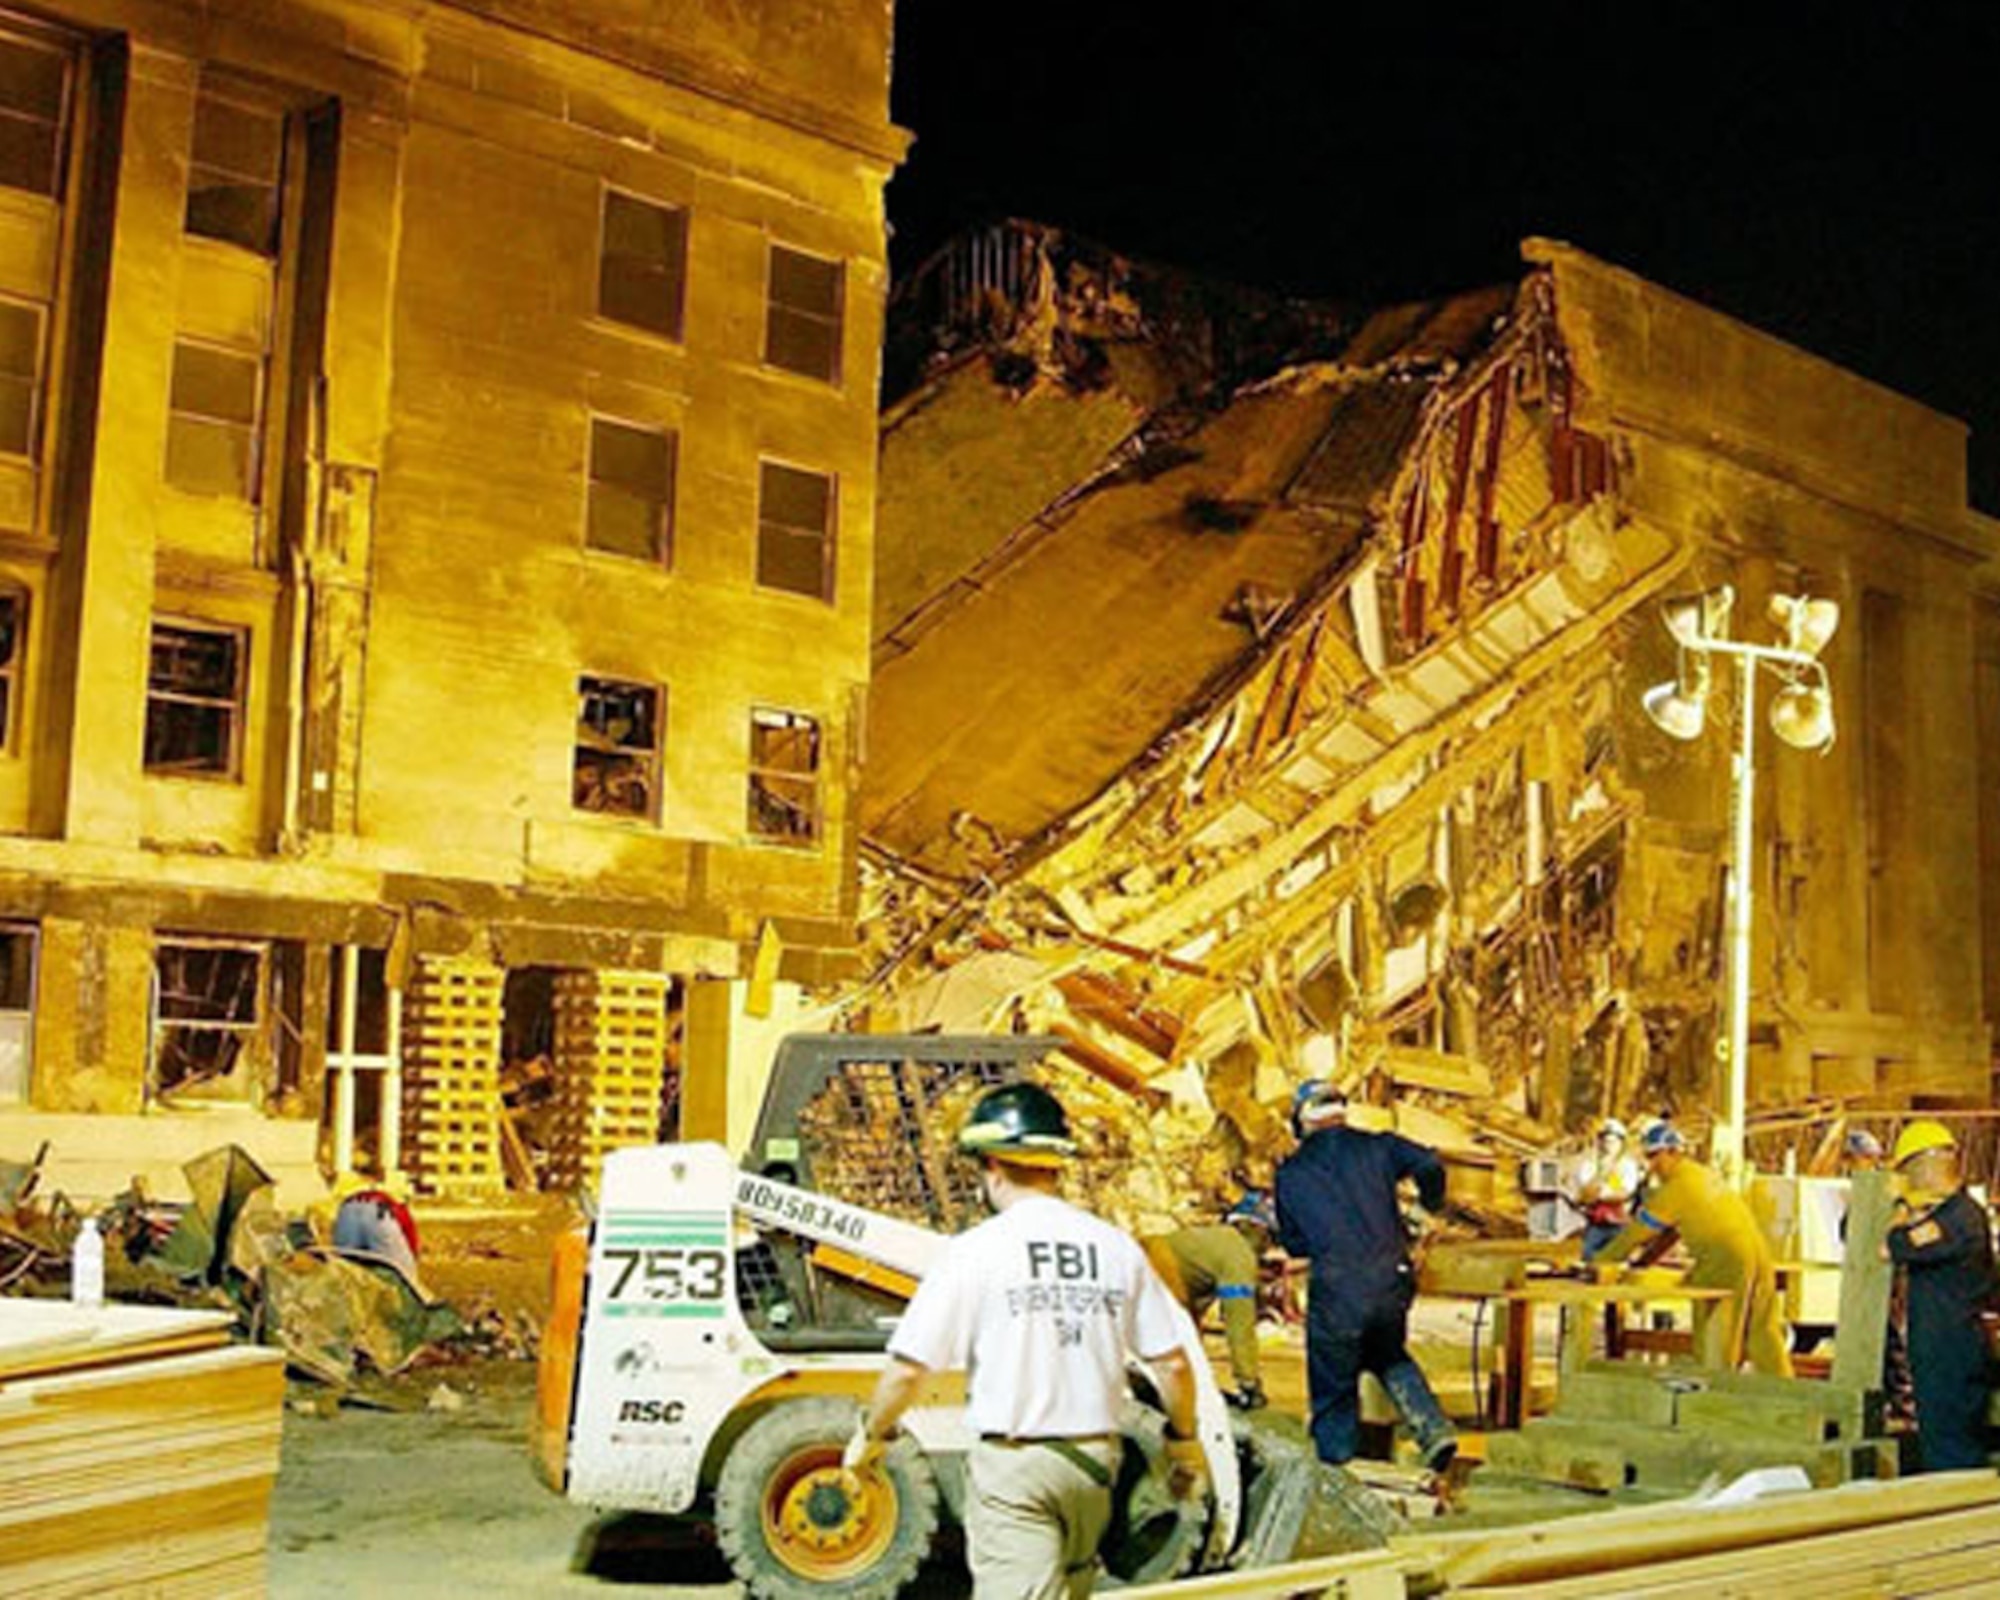 Emergency responders and firefighters work through the night, searching for survivors at the Pentagon, Sept. 11, 2001. The damage was caused when an aircraft, hijacked by al-Qaida terrorists, was deliberately crashed into the side of the building. (Corbis photo by Bill Vaughan/Released)